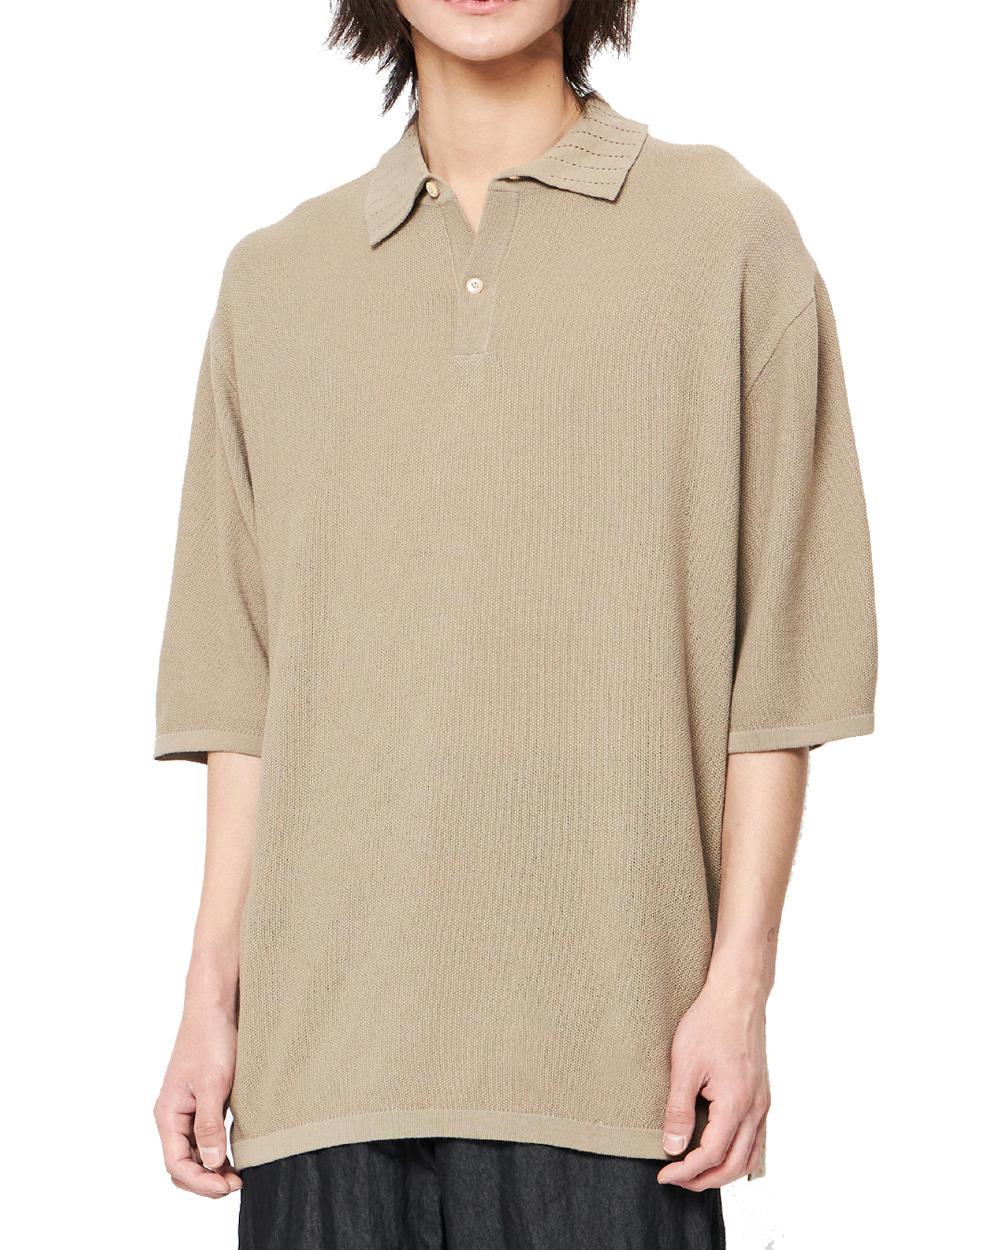 Knitted Polo Shirt (Sand)